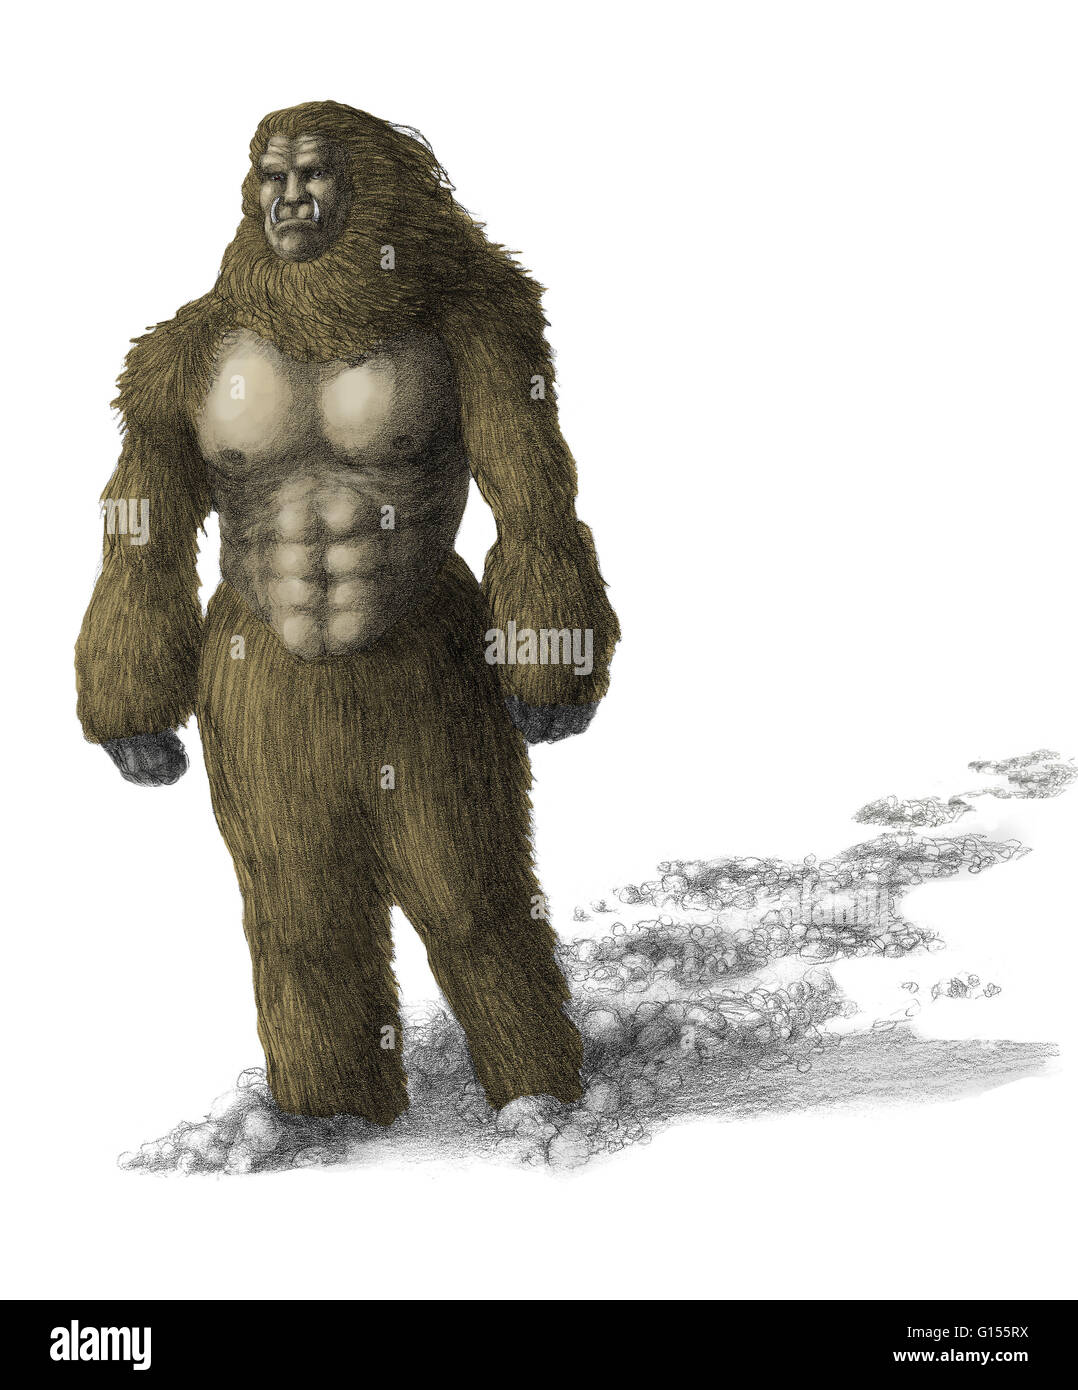 An illustration of Yeti or the Abominable Snowman. Yeti is an ape-like cryptid that supposedly inhabits the Himalayas. Stock Photo